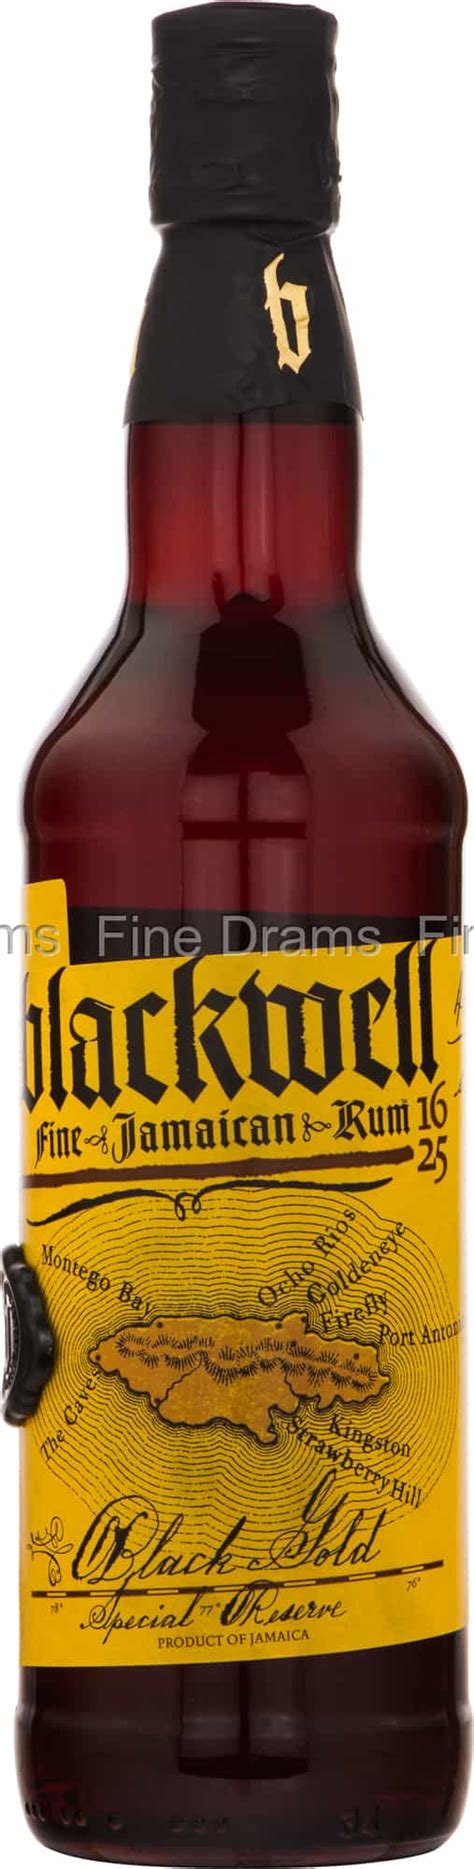 Mama brown's delightful traditional jamaican rum cakes are perfect for all occasions. Blackwell Fine Jamaican Rum